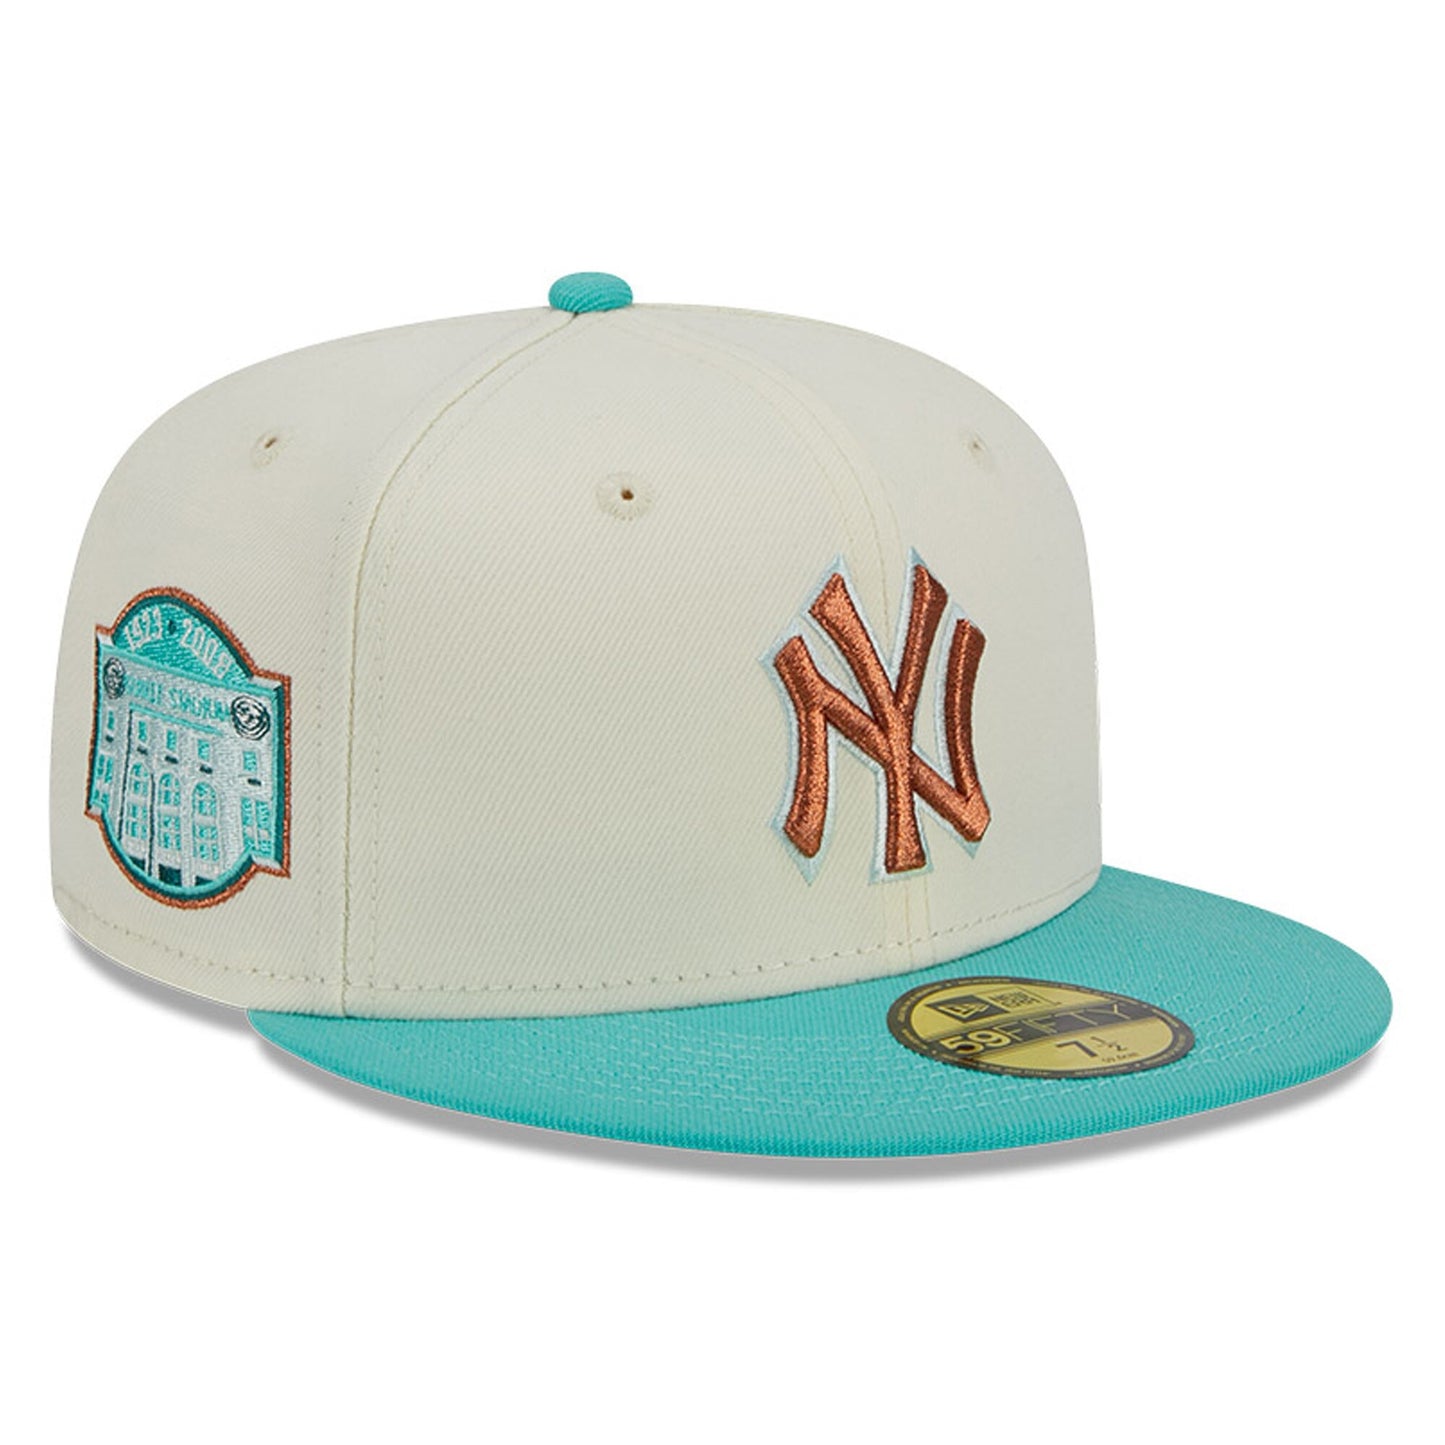 New York Yankees New Era City Icon 59FIFTY Fitted Hat - White